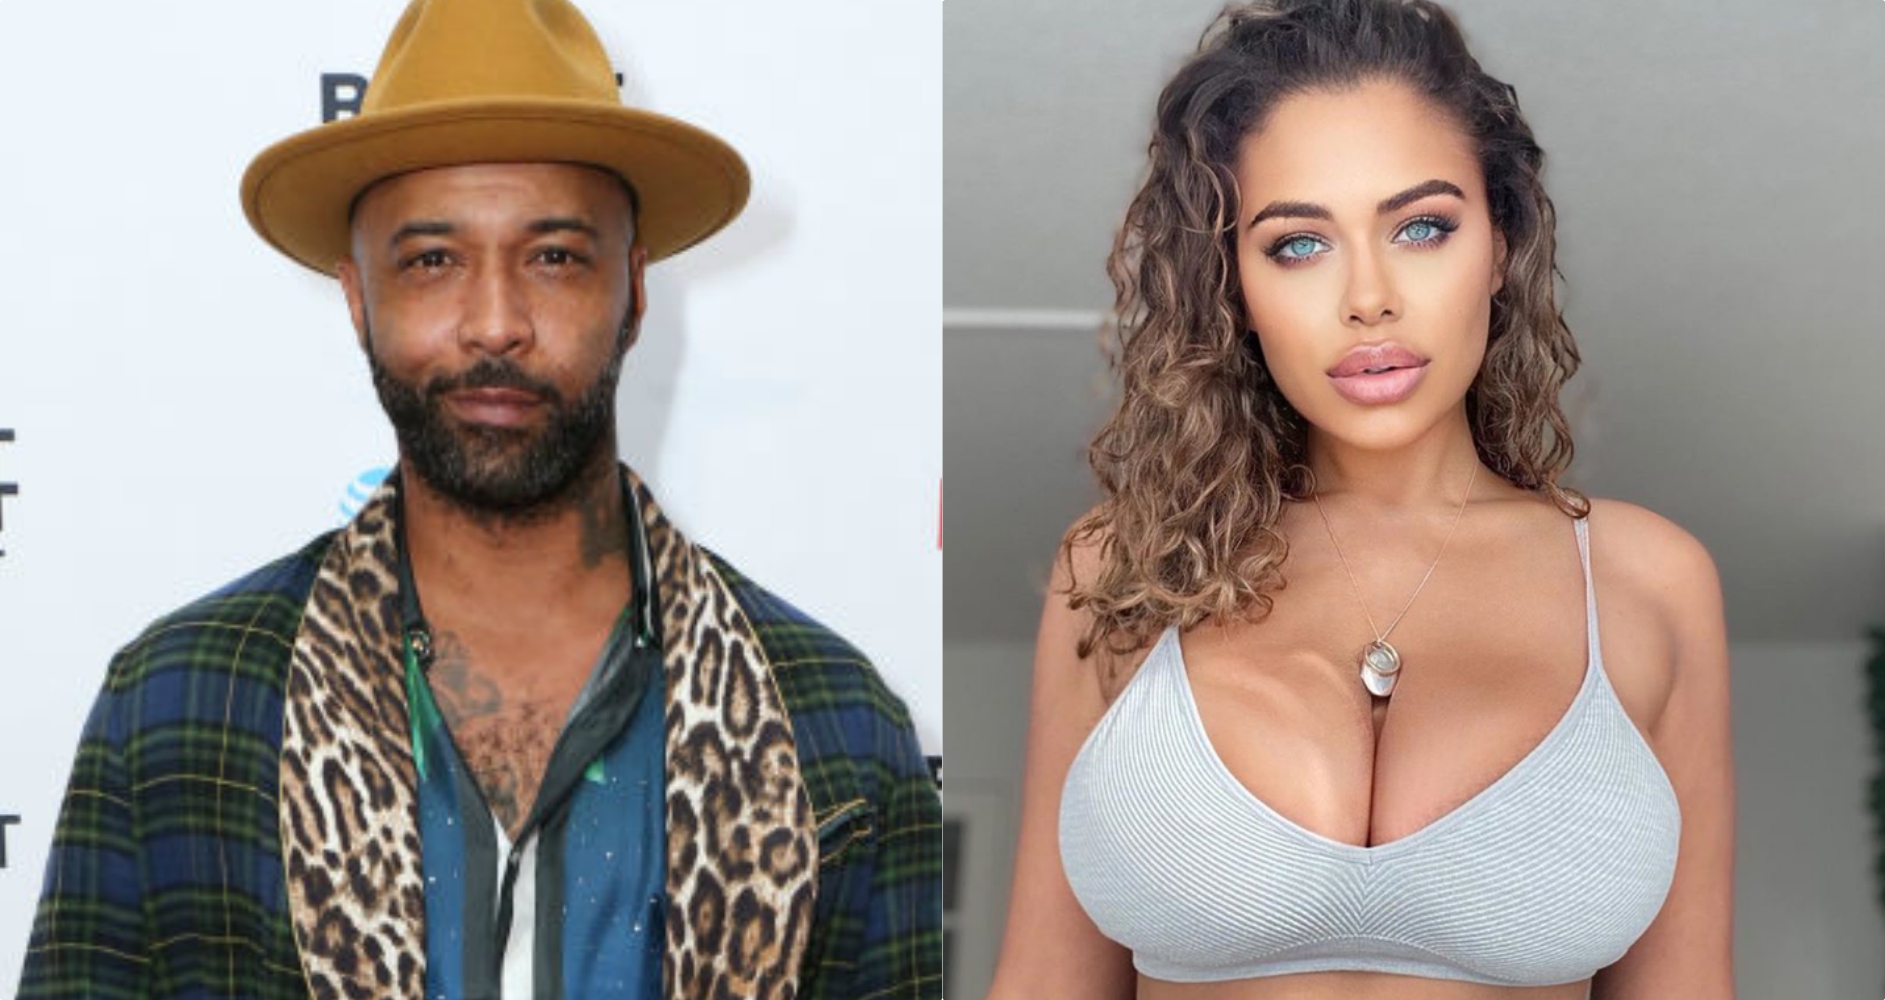 Joe Budden Says He Took A 1st Date To A Swingers Club pic pic